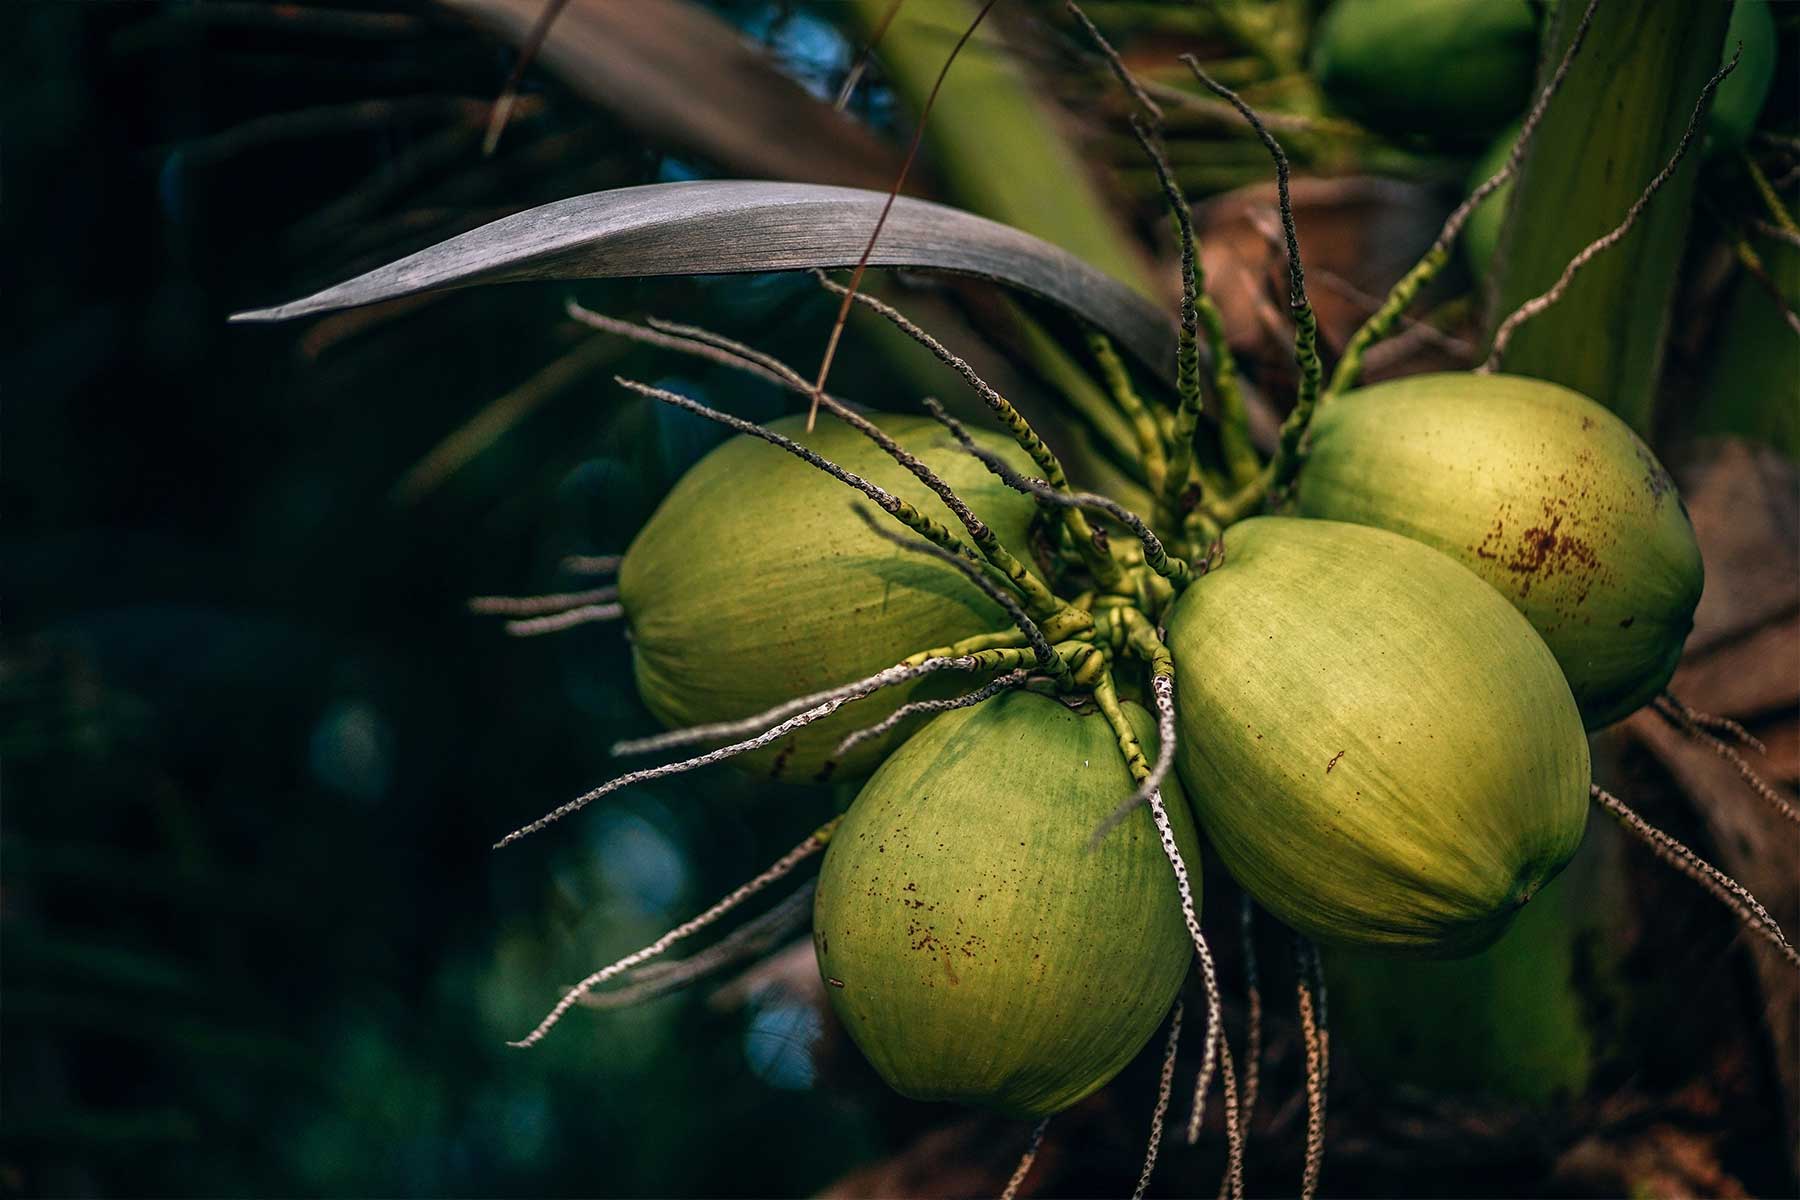 Coconut palms bear fruit all year round, as the coconuts ripen continuously. However, it takes around 12 years before a palm bears its first fruit. Depending on the variety, location and care, a palm can produce up to 150 coconuts per year. (Image: © Nipanan Lifestyle/iStock.com)